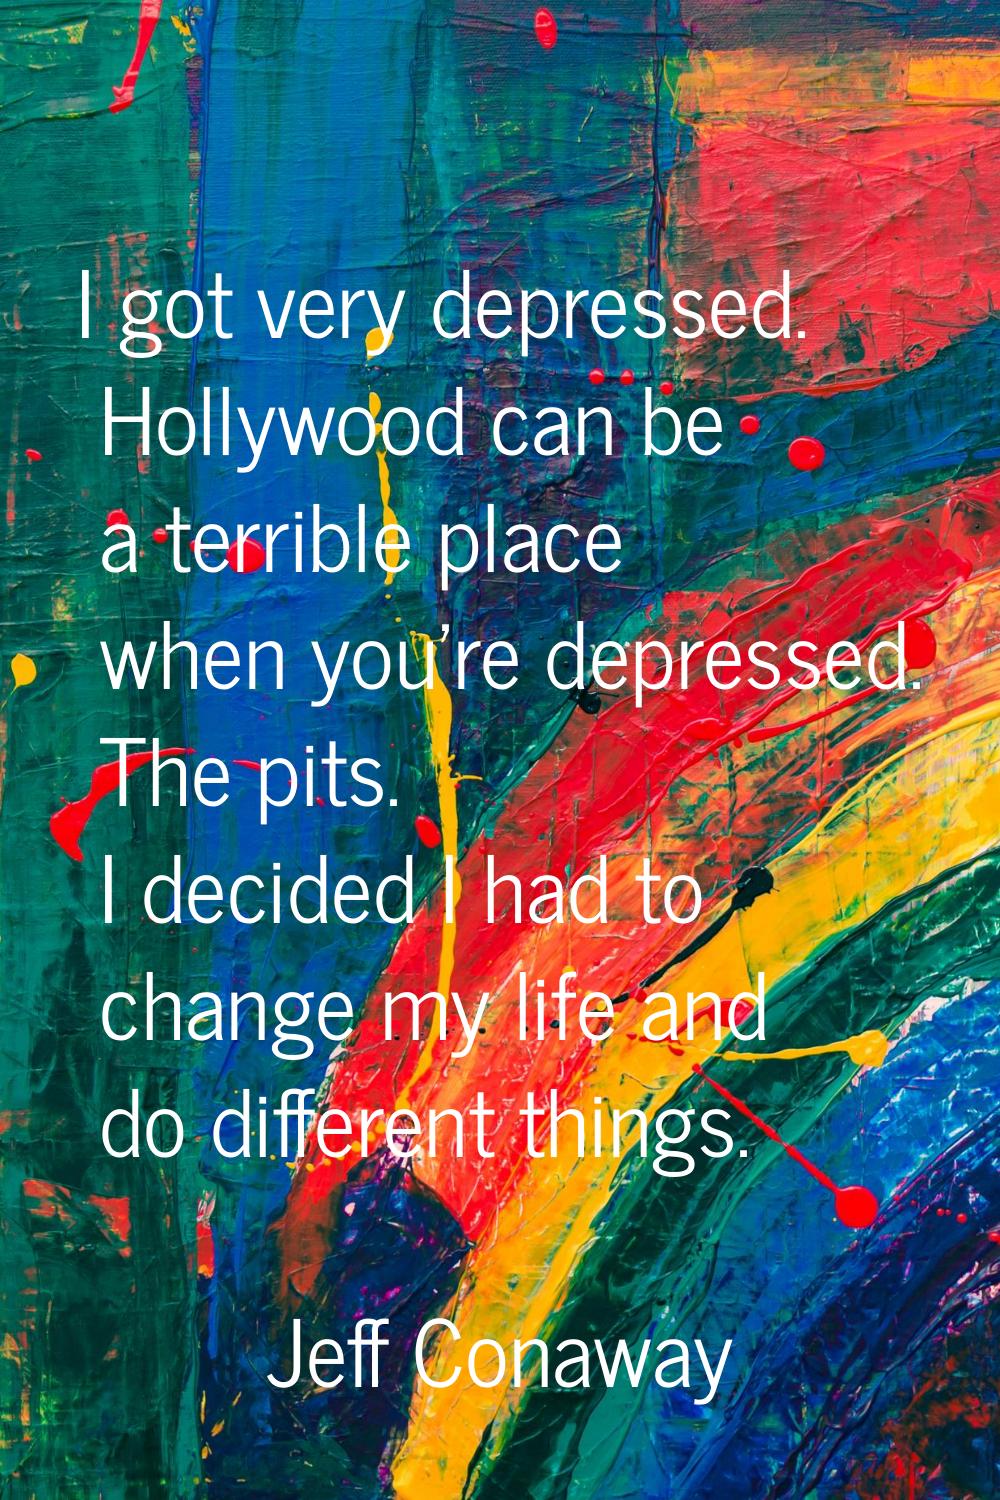 I got very depressed. Hollywood can be a terrible place when you're depressed. The pits. I decided 